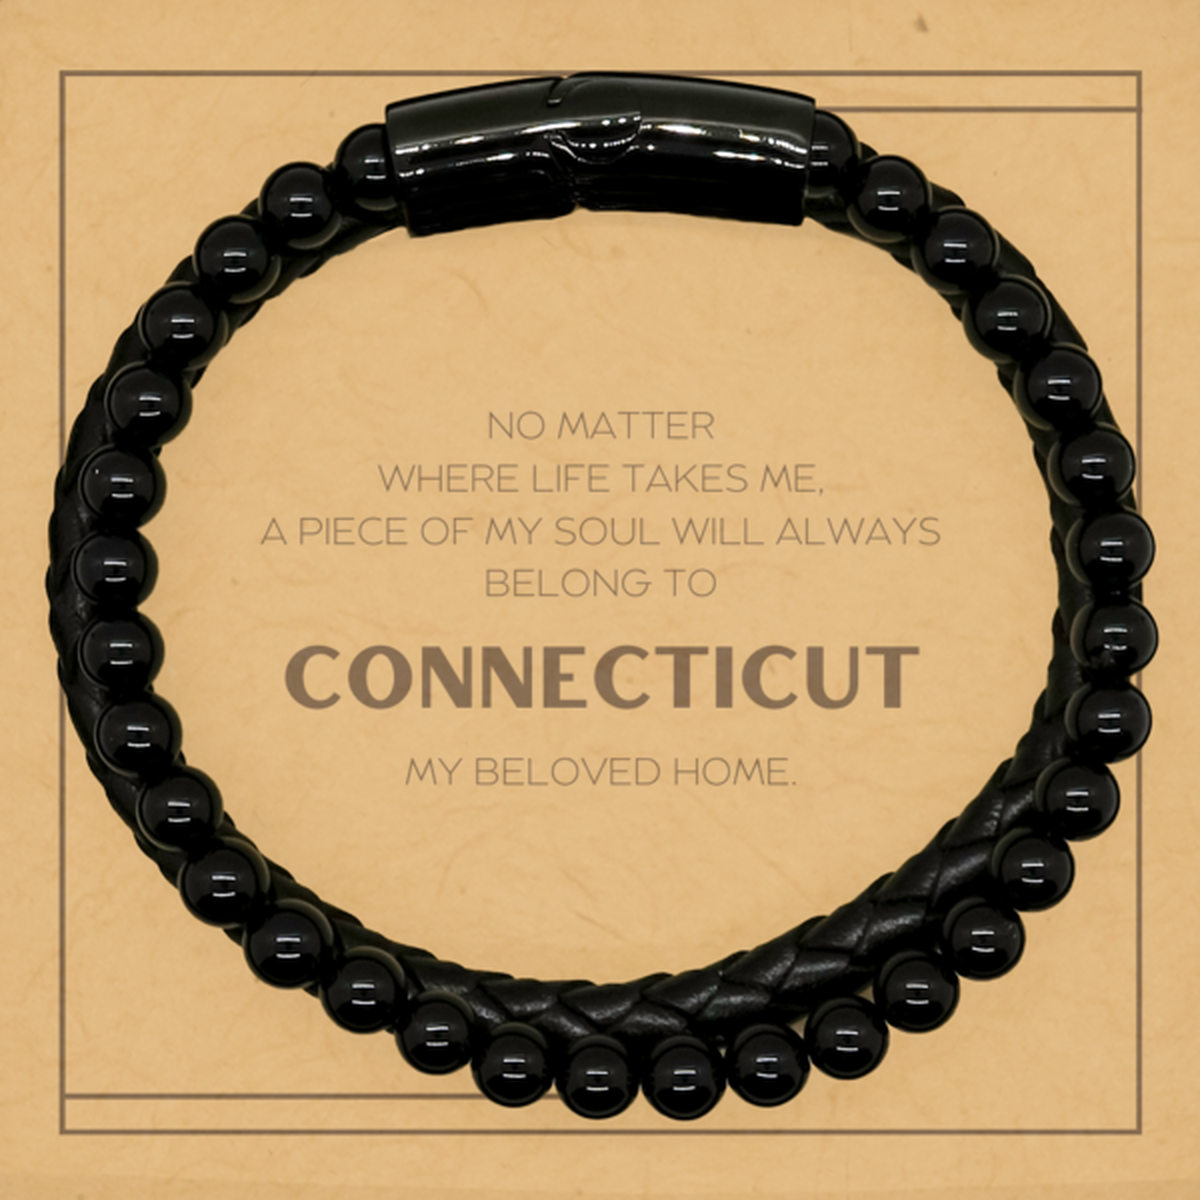 Love Connecticut State Gifts, My soul will always belong to Connecticut, Proud Stone Leather Bracelets, Birthday Unique Gifts For Connecticut Men, Women, Friends